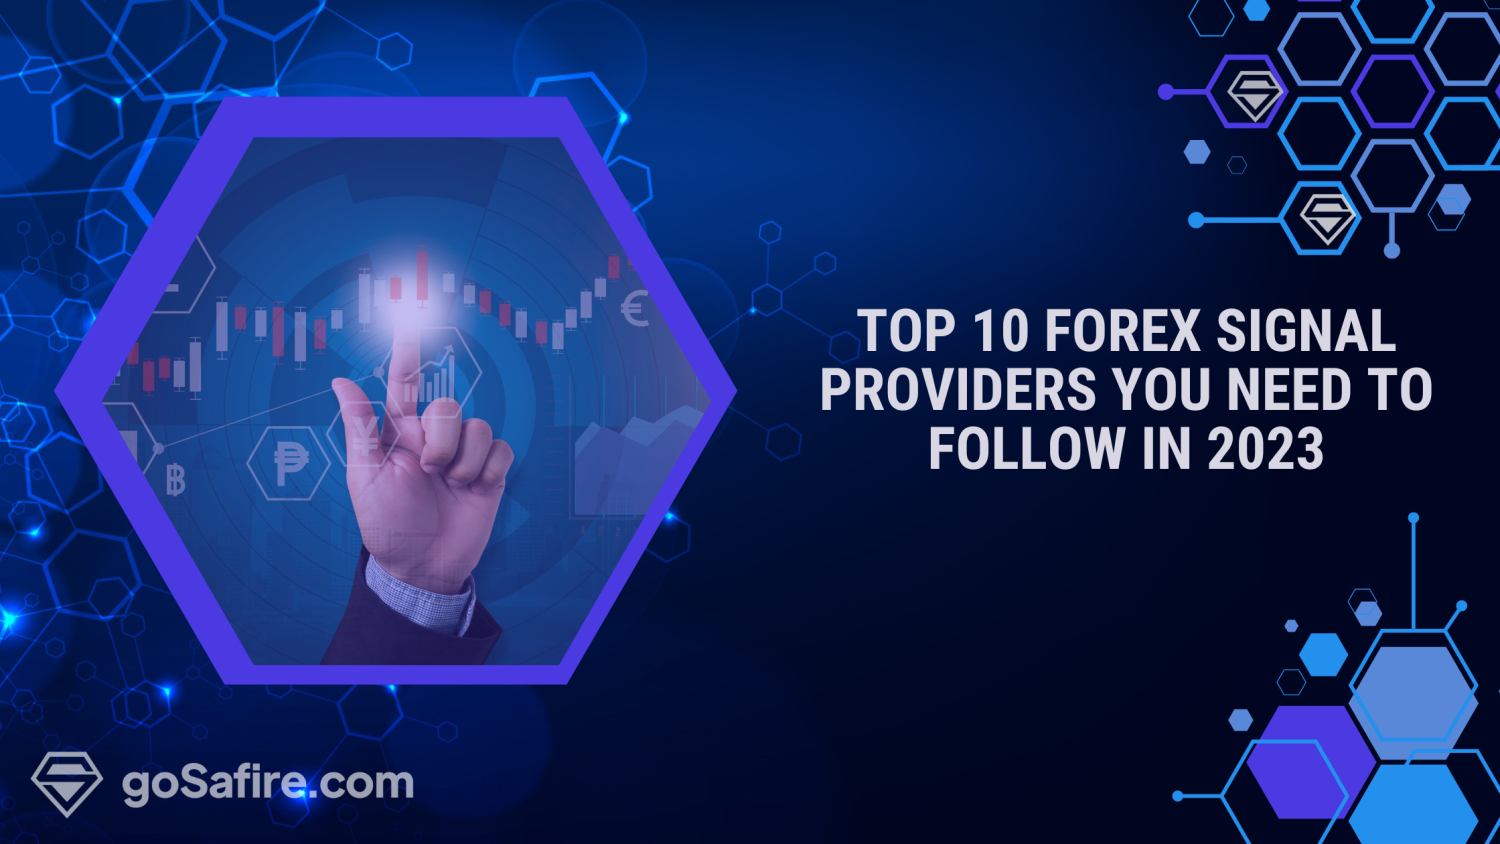 Top 10 Forex Signal Providers You Need to Follow in 2023